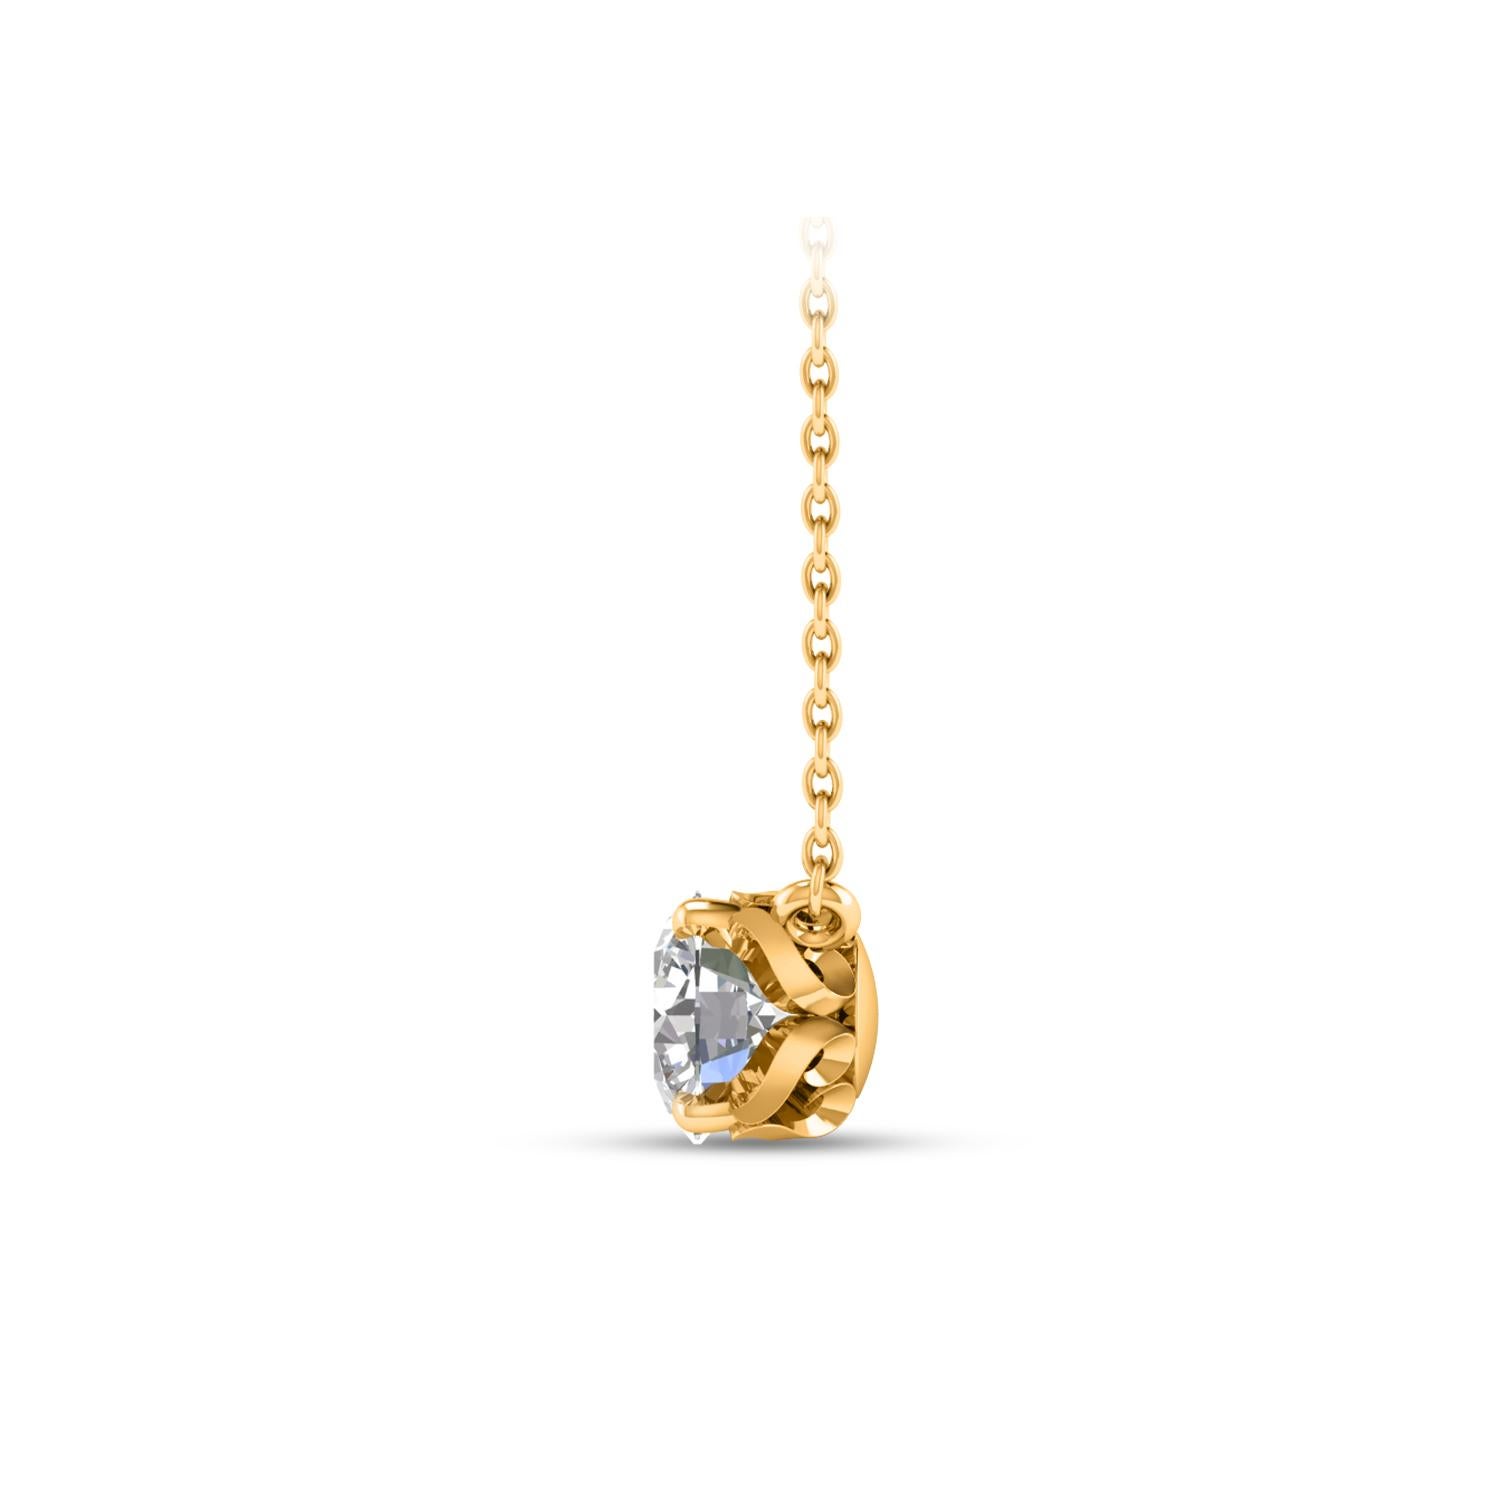 Contemporary Harakh GIA Certified 0.33 Carat Solitaire Diamond Pendant Necklace in 18 Kt Gold For Sale